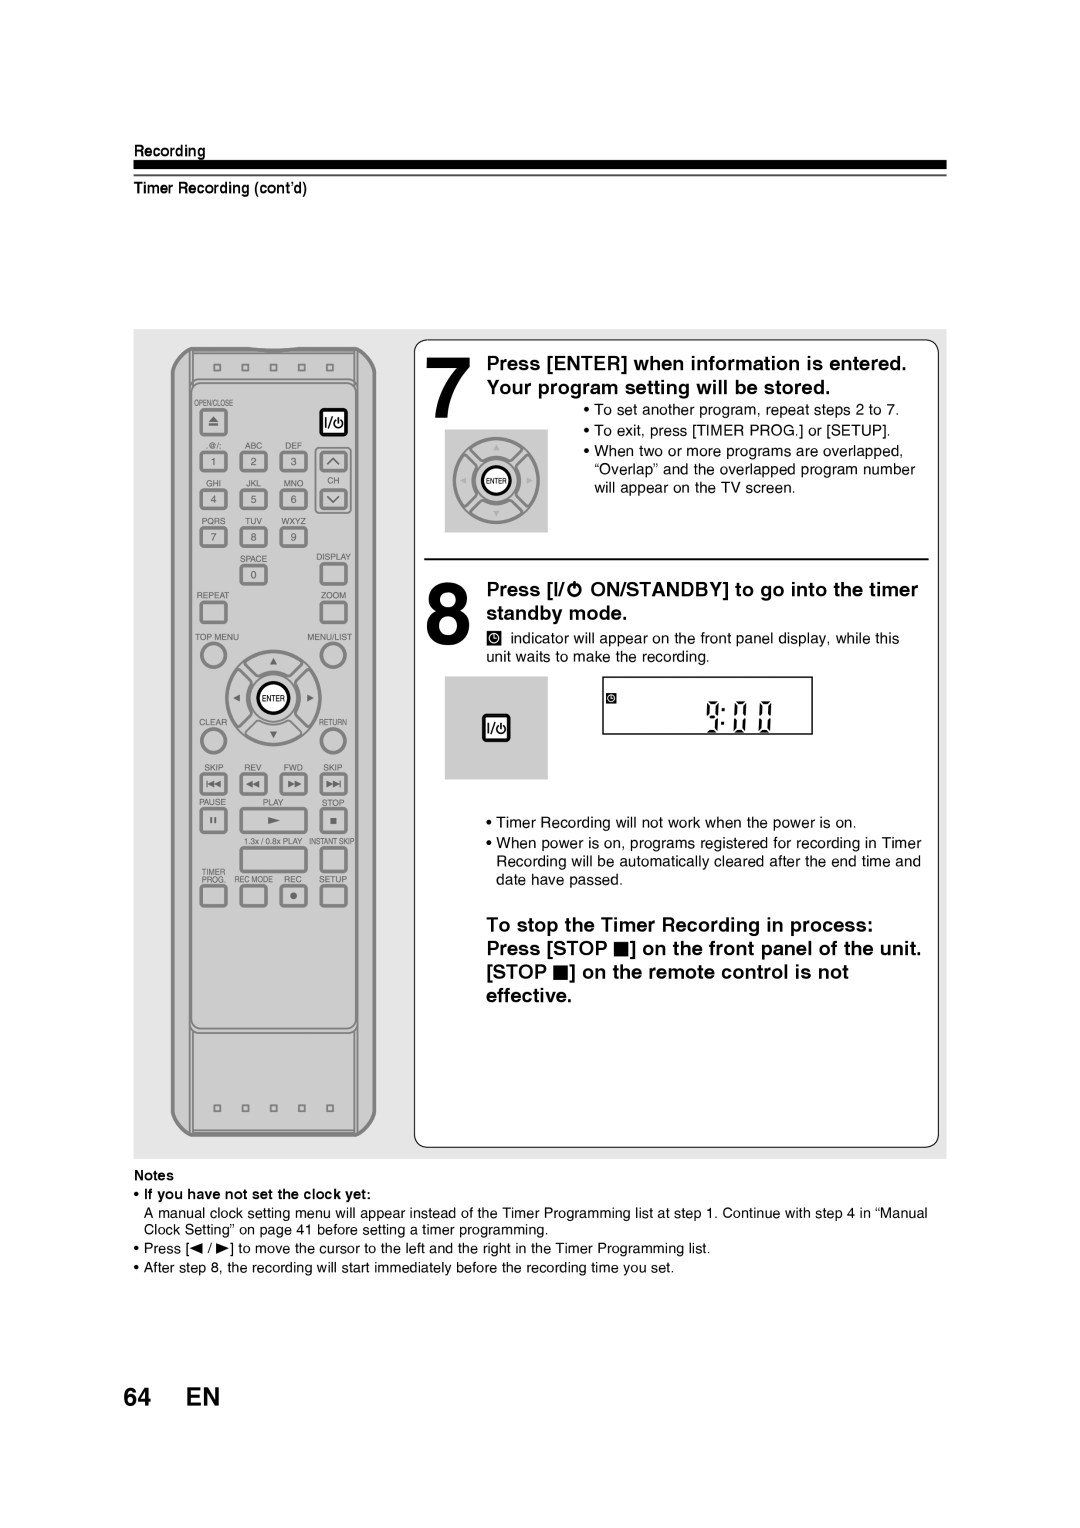 Toshiba D-RW2SU/D-RW2SC 64 EN, Press I/y ON/STANDBY to go into the timer standby mode, Recording Timer Recording cont’d 